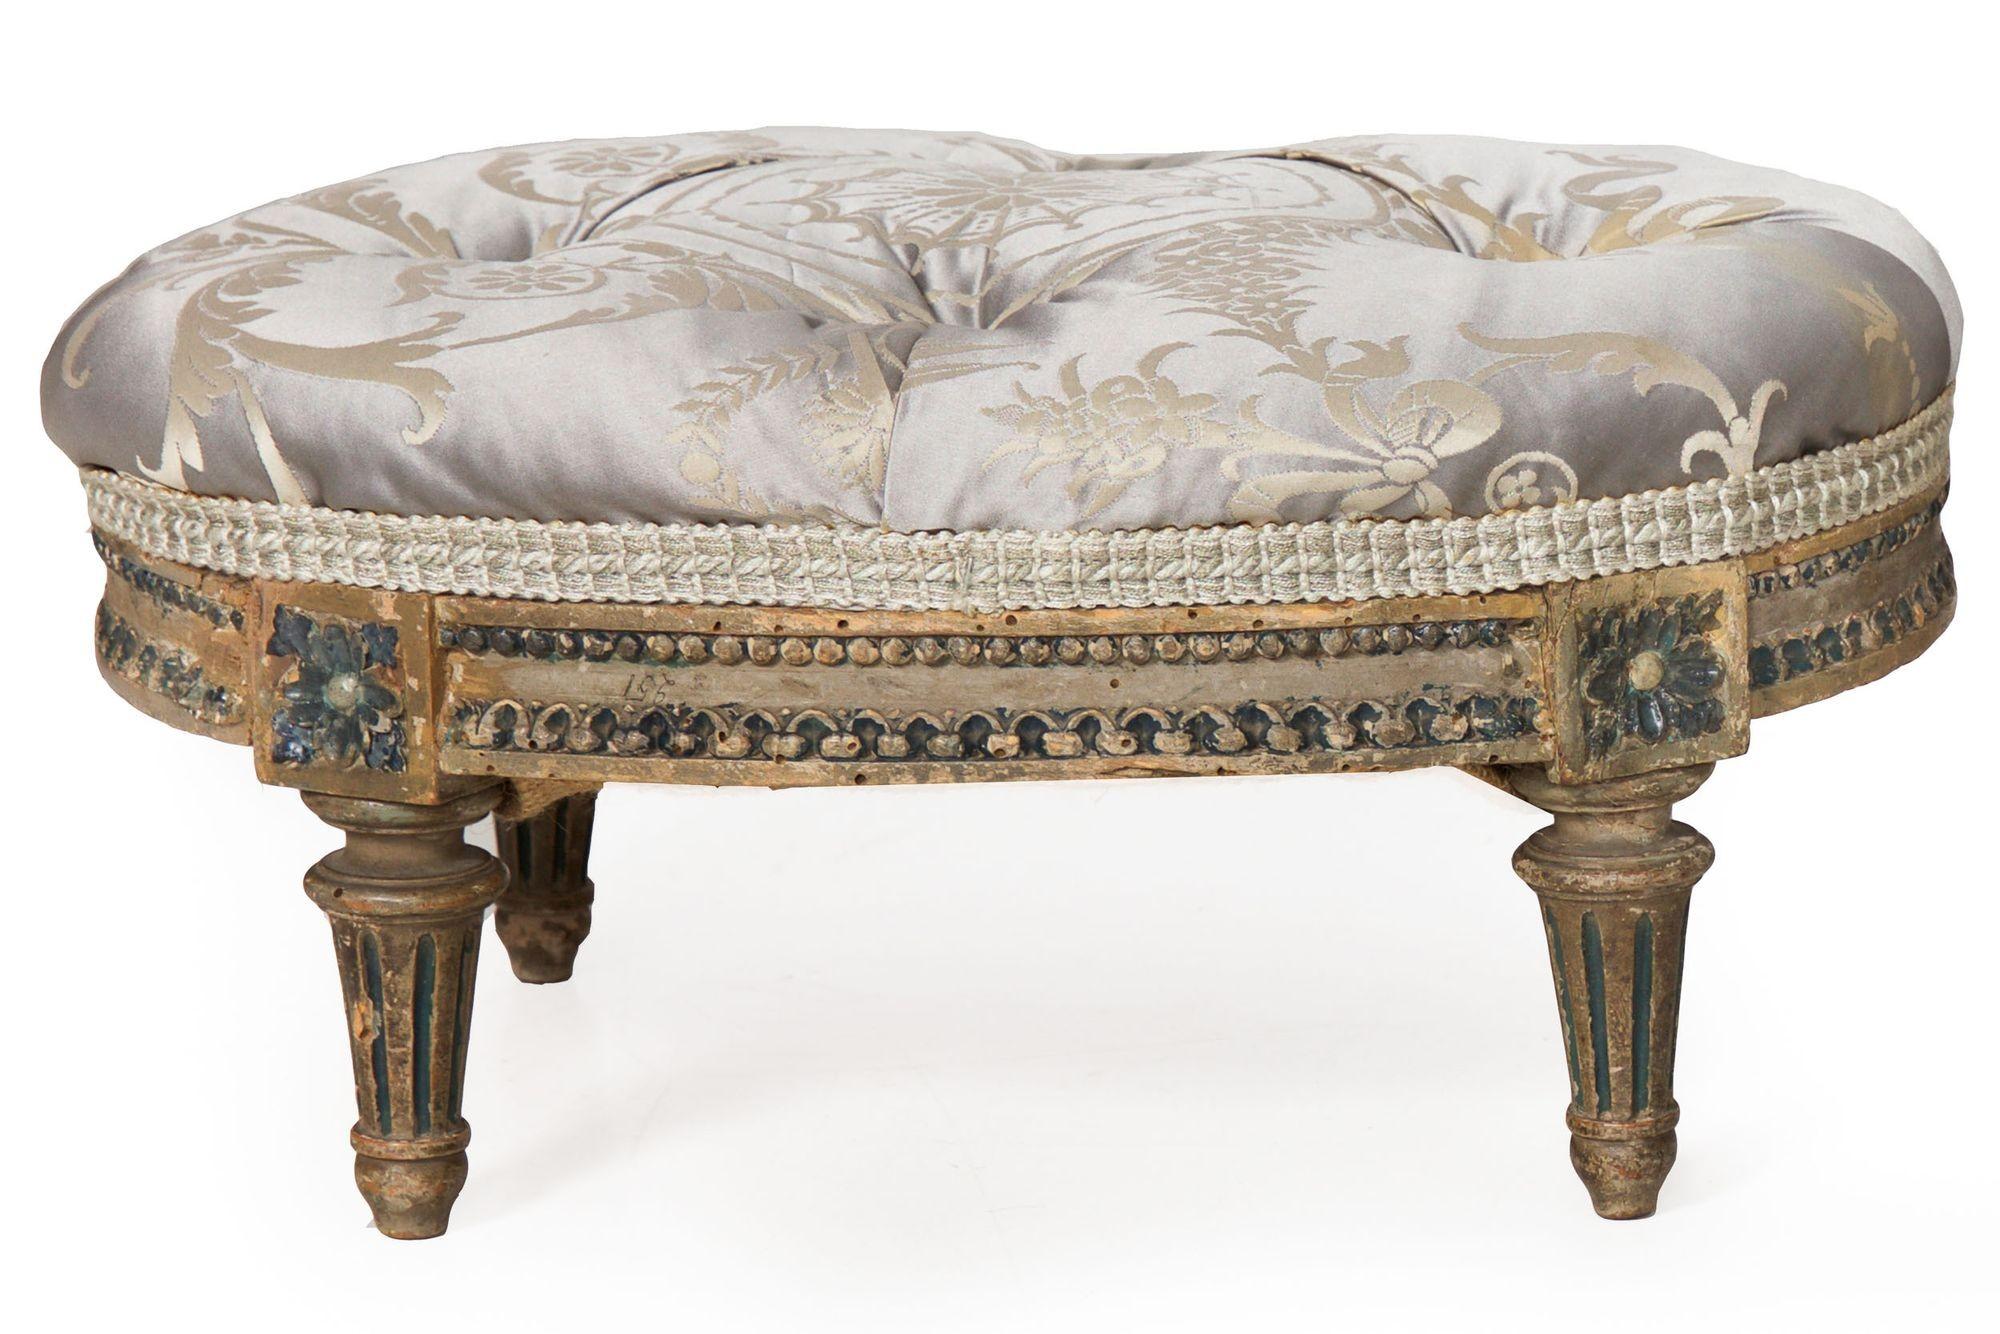 FRENCH LOUIS XVI PAINTED FOOTSTOOL
France, circa late 18th century
Item # 206DGU29P-1 

A very nice and petite footstool from the last quarter of the 18th-century, this lovely stool retains an old and beautifully patinated painted surface of overall